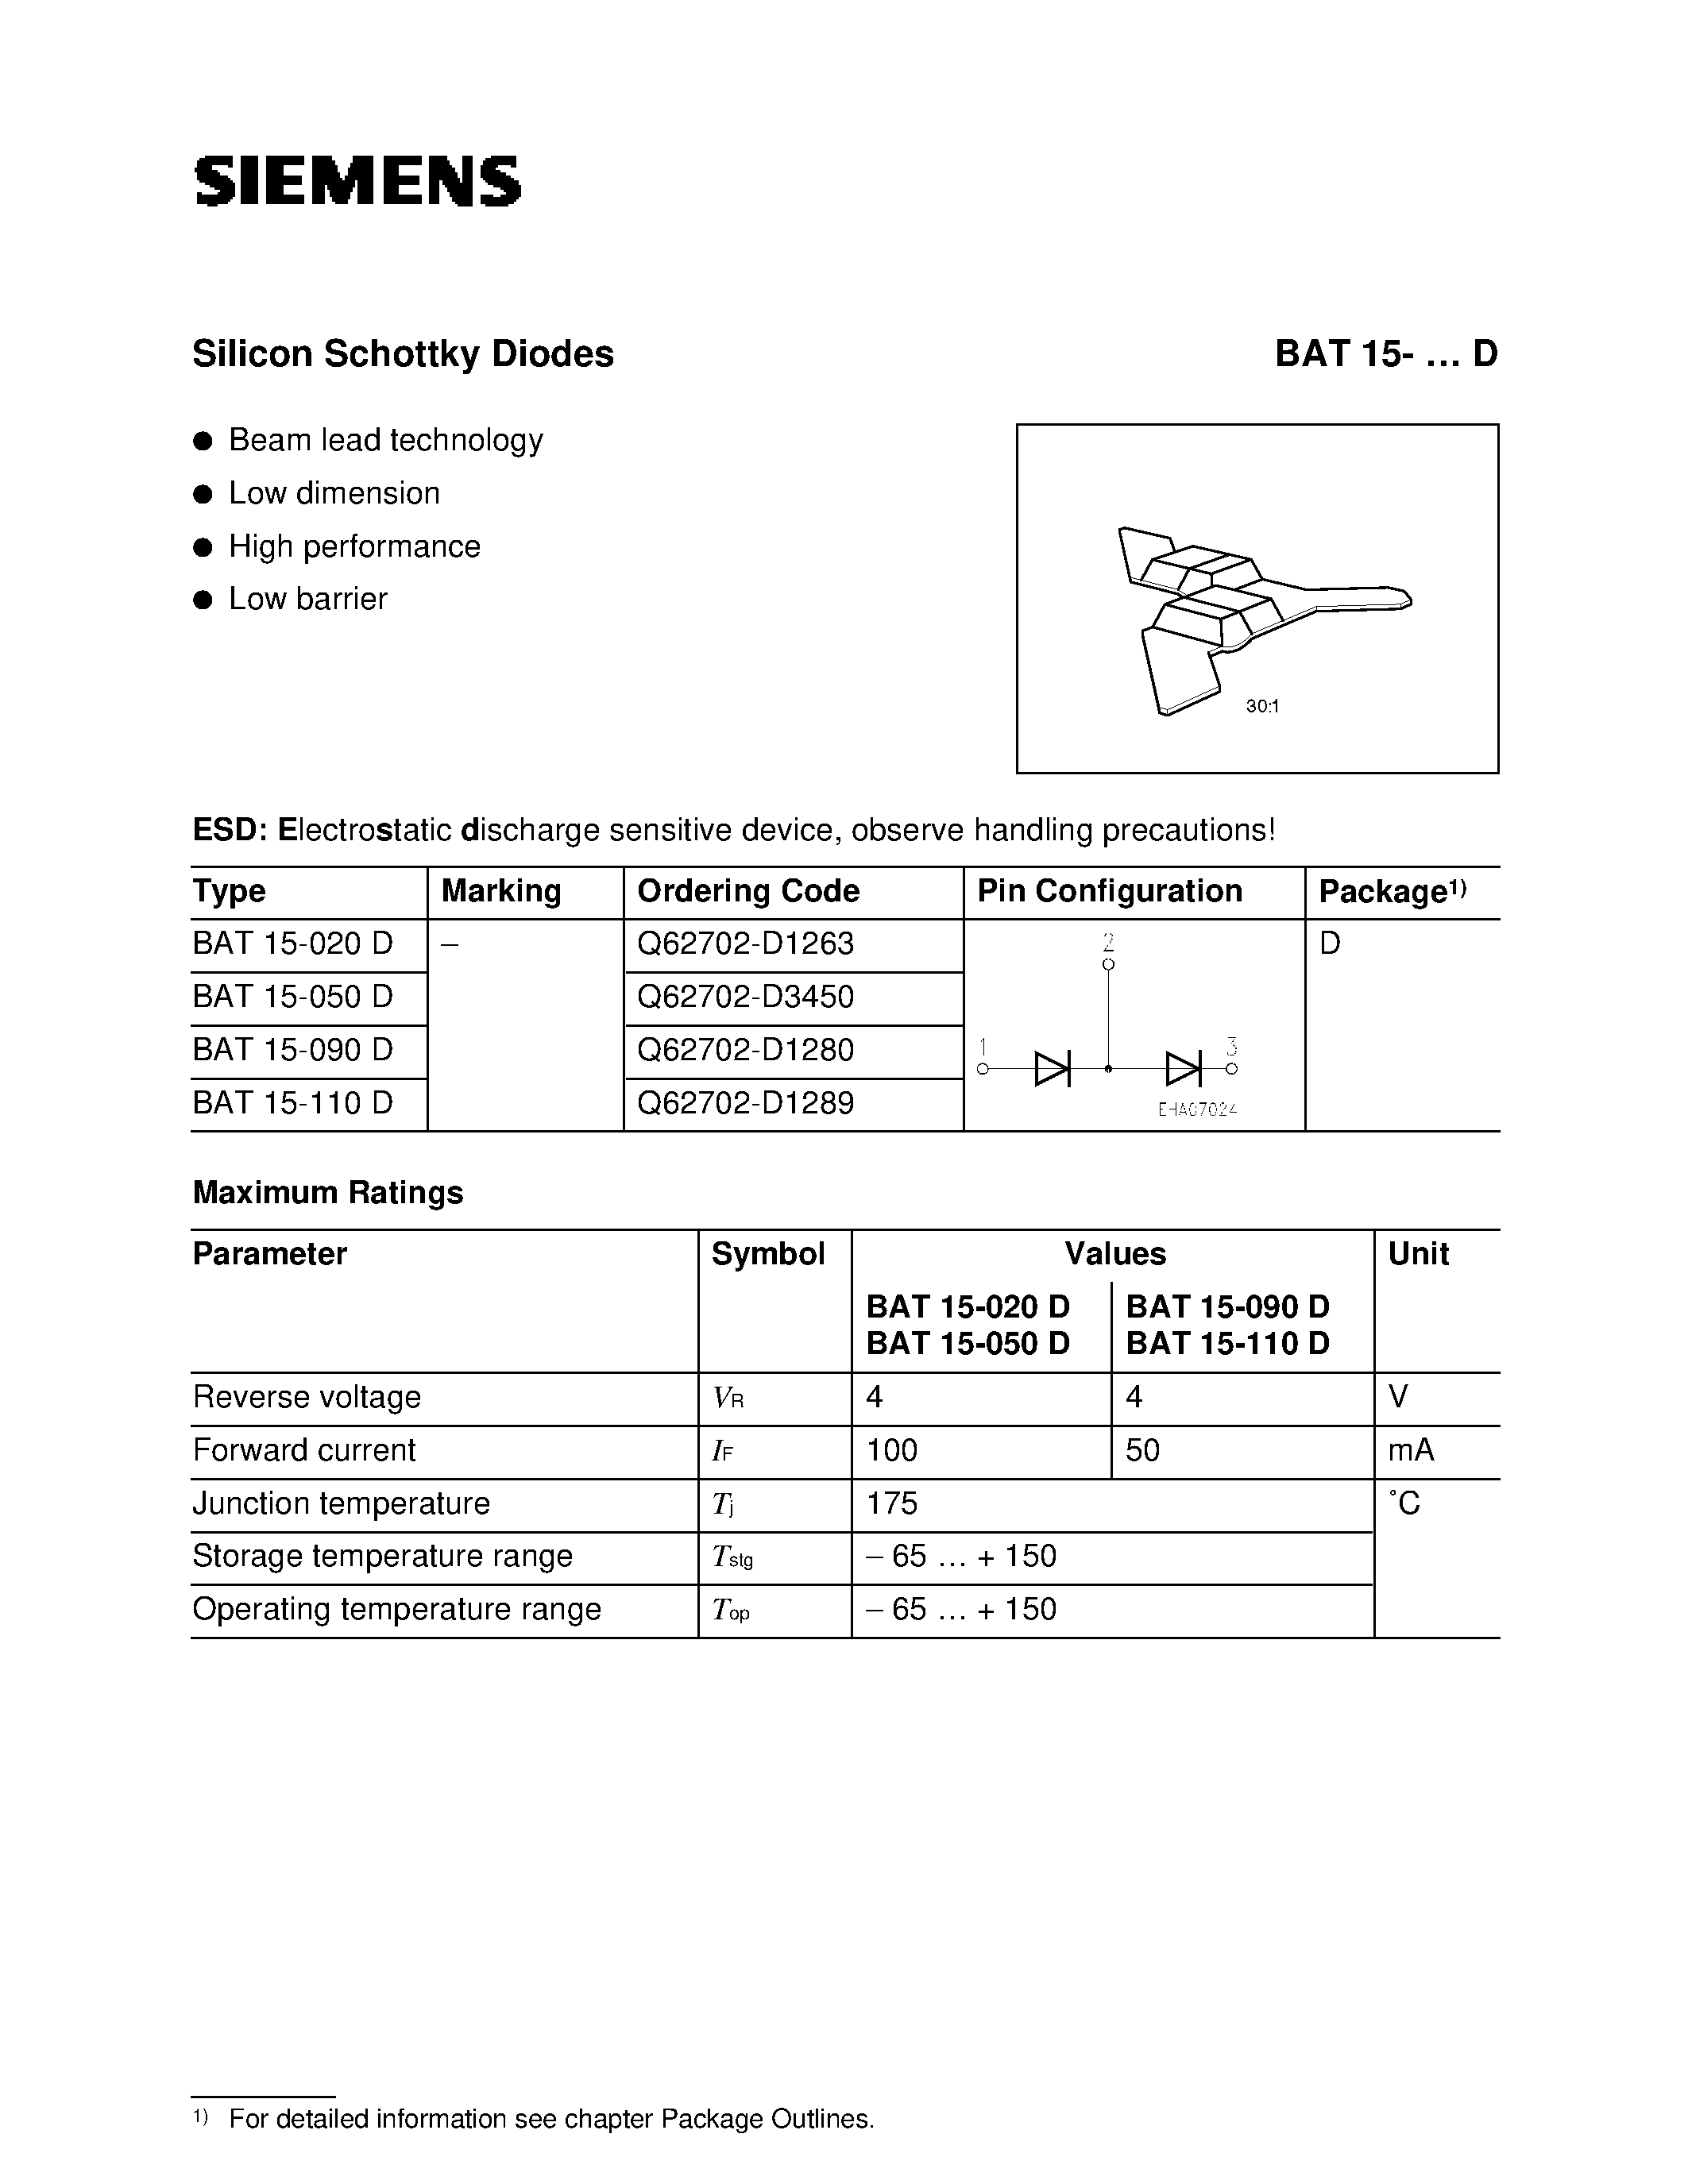 Datasheet BAT15-D - Silicon Schottky Diodes (Beam lead technology Low dimension High performance Low barrier) page 1